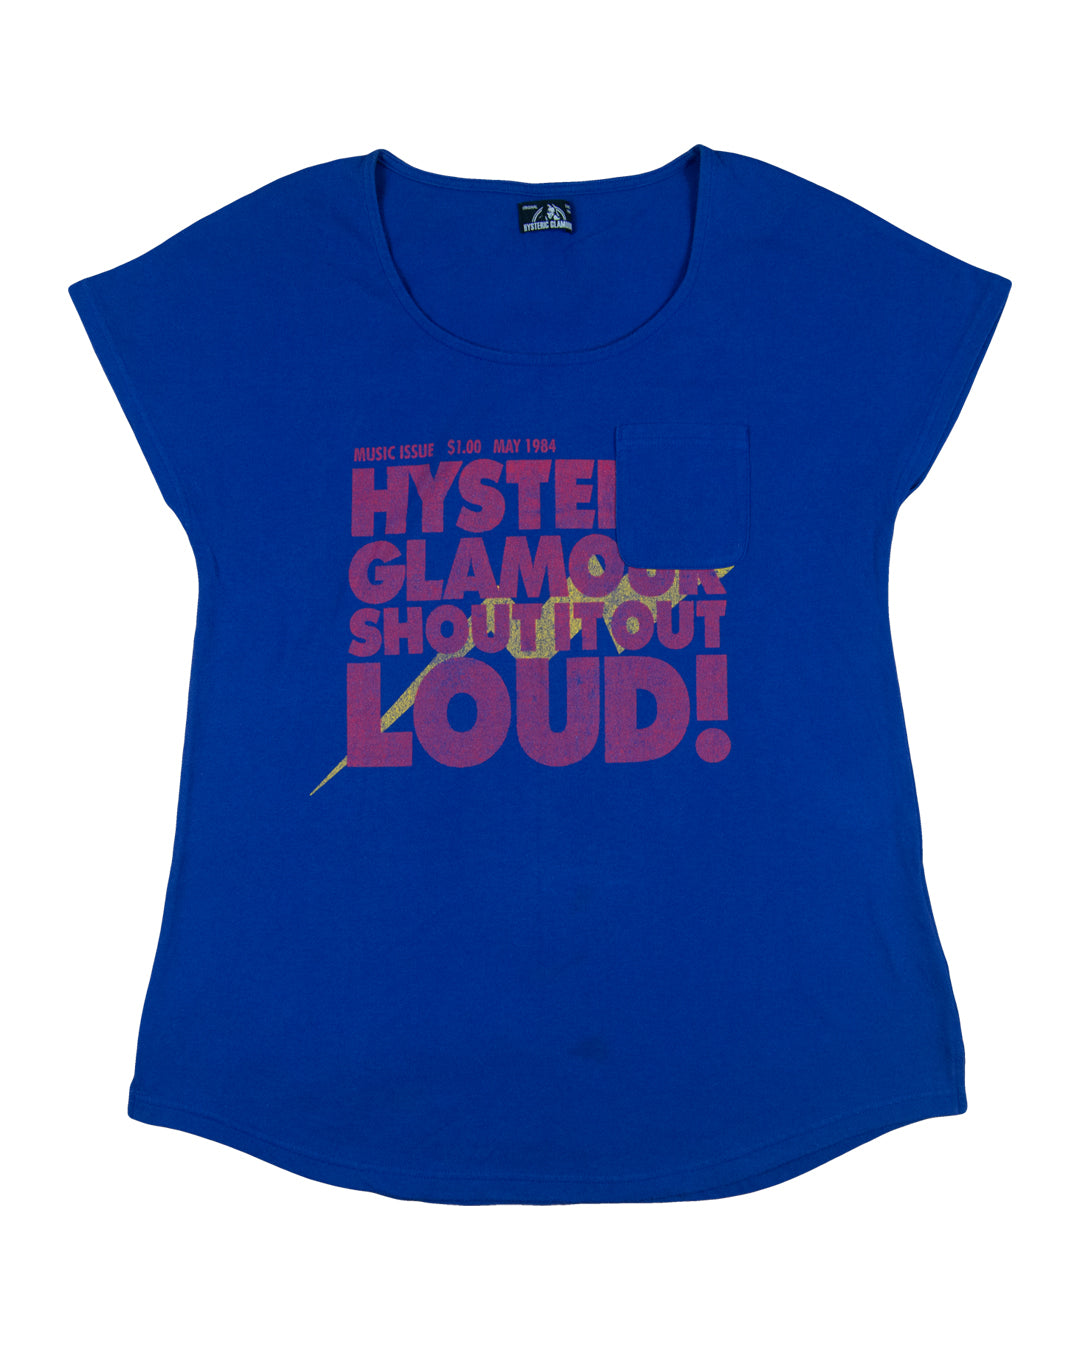 Hysteric Glamour Shout It Out Loud! Tee